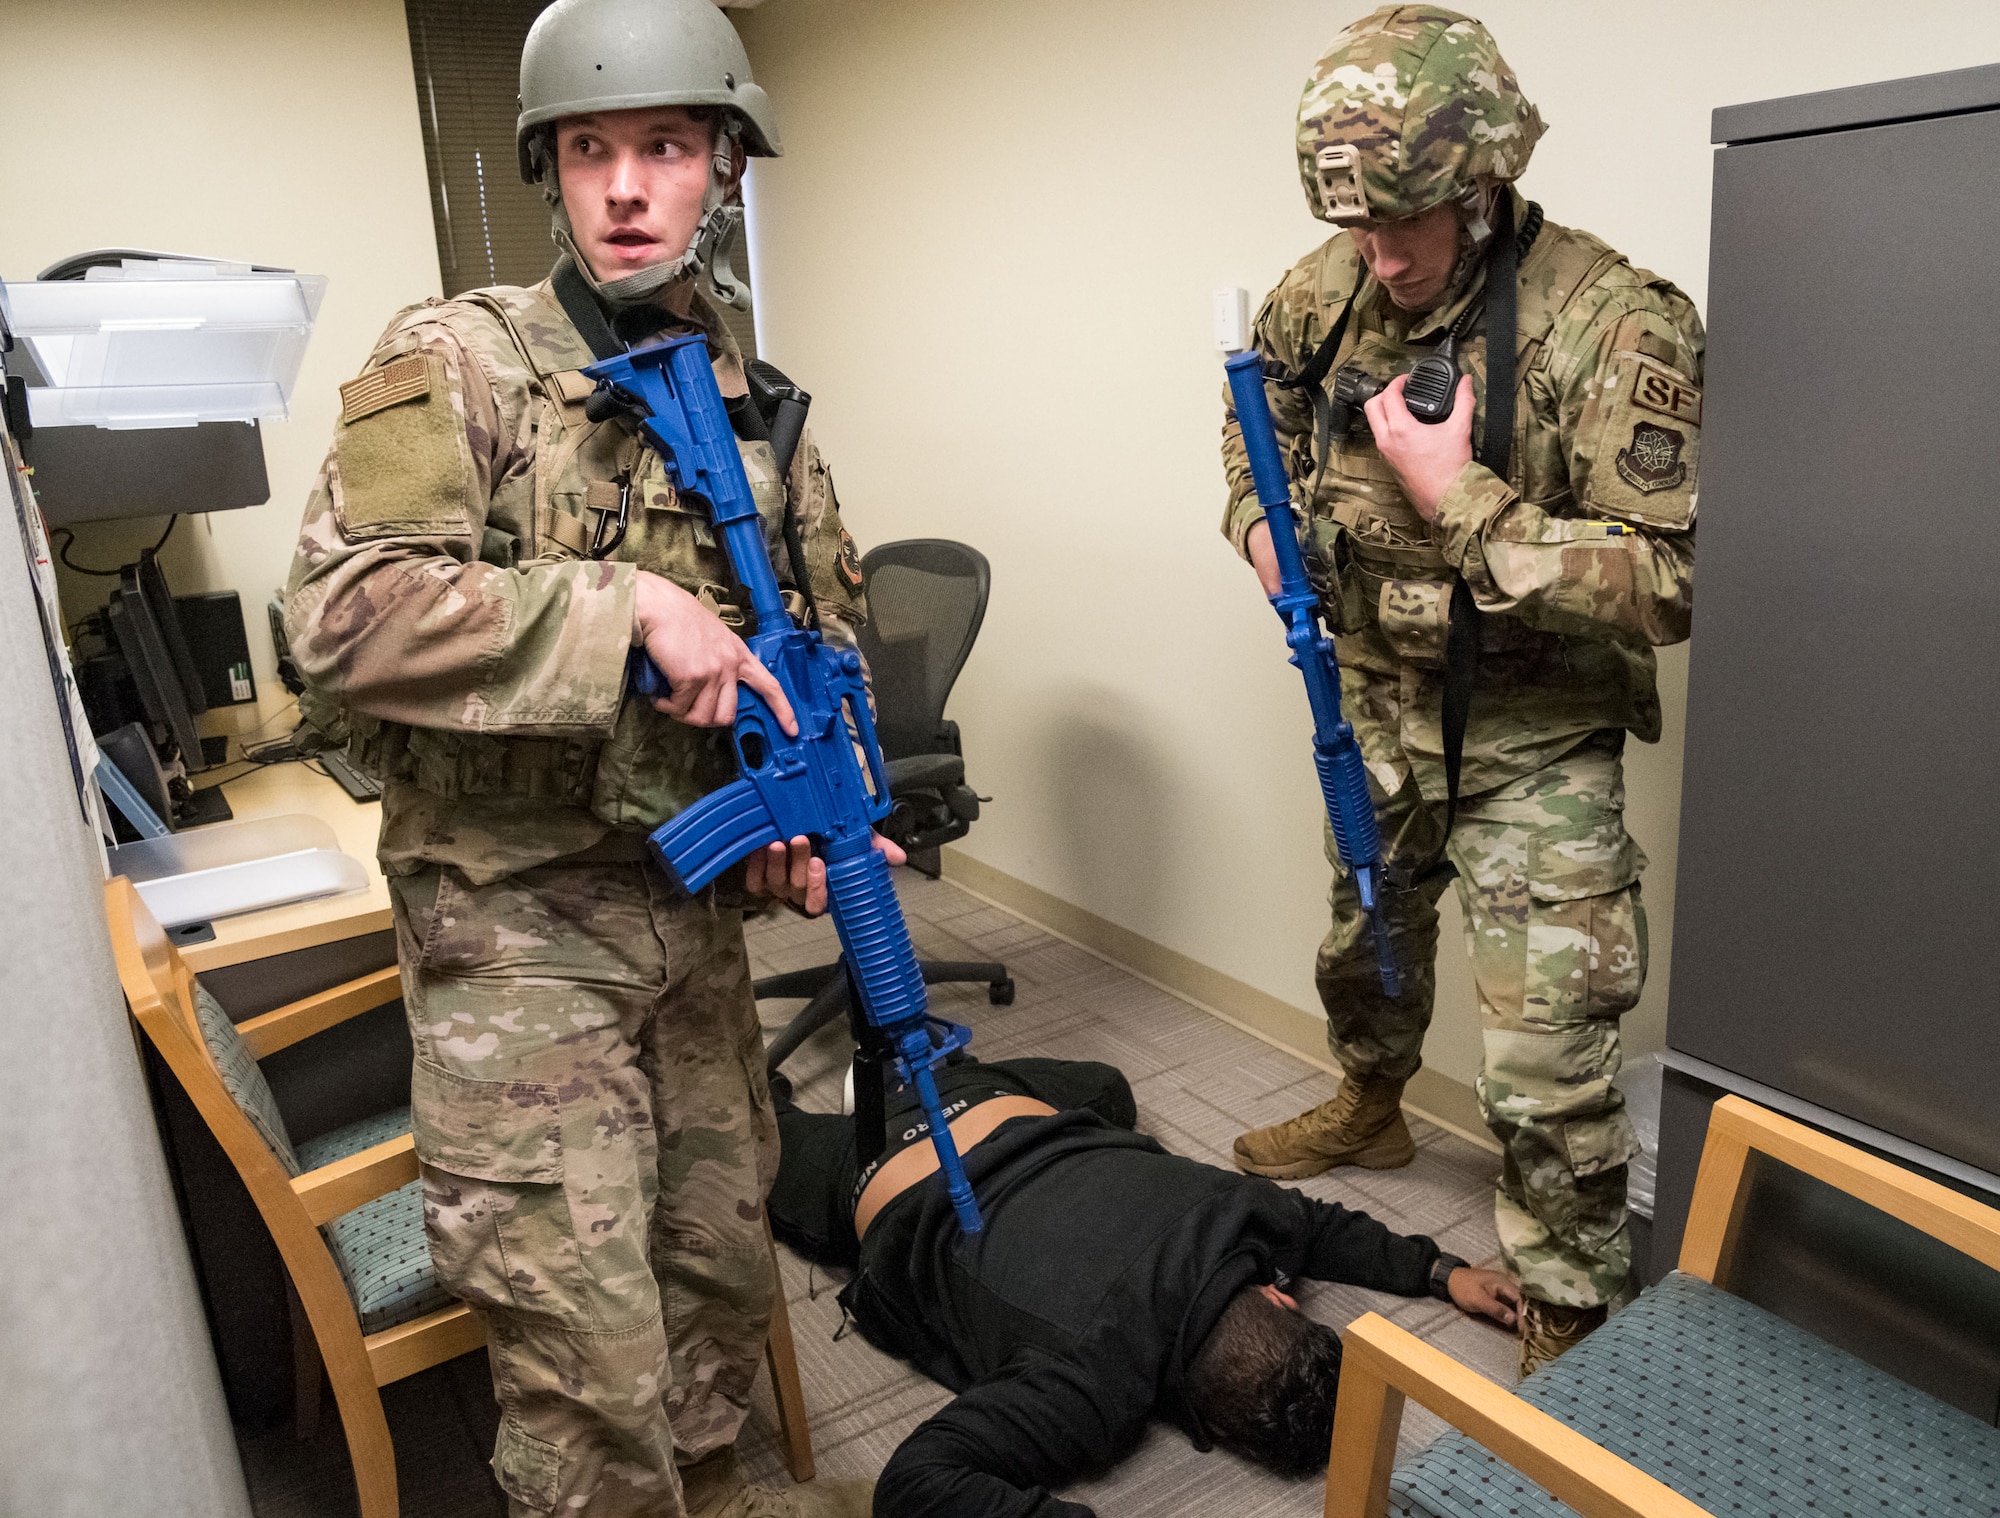 Senior Airman Kale Banyas, 436th Security Forces Squadron response force member, stands watch as Staff Sgt. Robert Wilson, 436th SFS response force leader, makes a radio call after neutralizing a simulated active shooter at the 436th Medical Group clinic during Exercise DORMAR Nov. 12, 2019, at Dover Air Force Base, Del. Simulated active shooter Senior Airman Christian Dungca, 436th SFS response force member, walked around the clinic, inflicting simulated injuries and casualties. (U.S. Air Force photo by Roland Balik